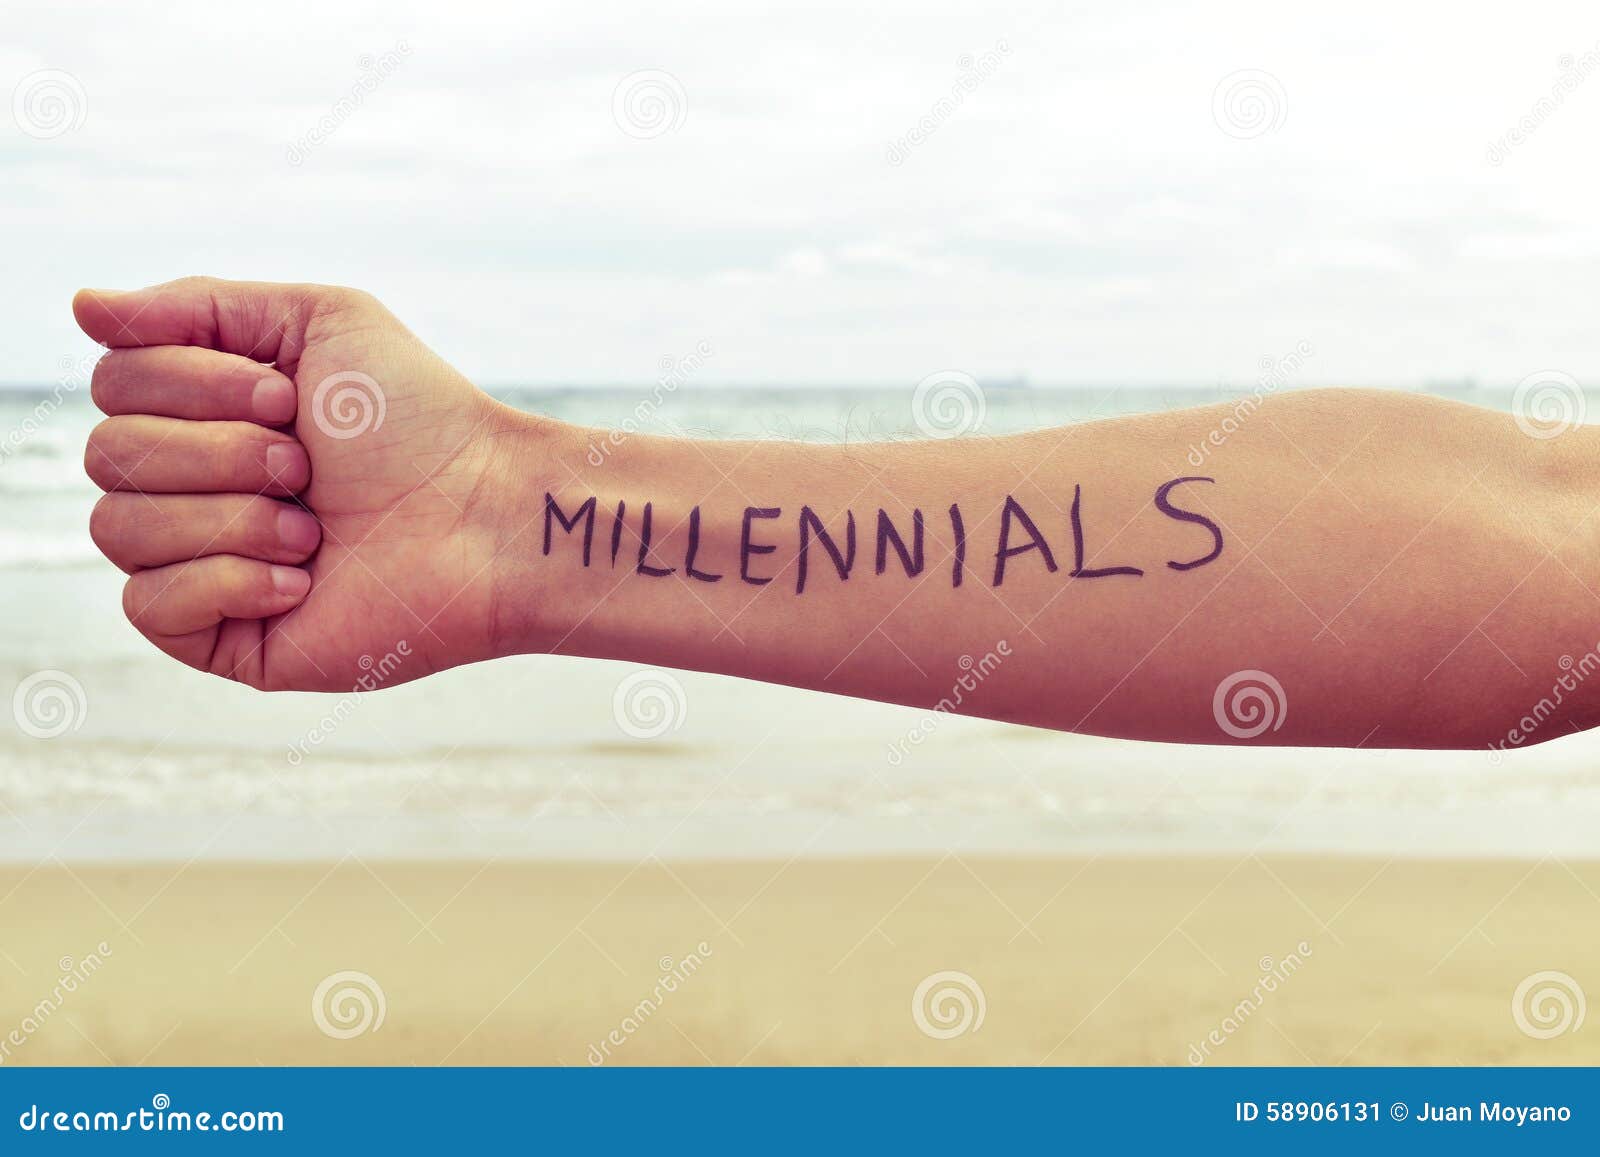 young man with the word millennials written in his arm